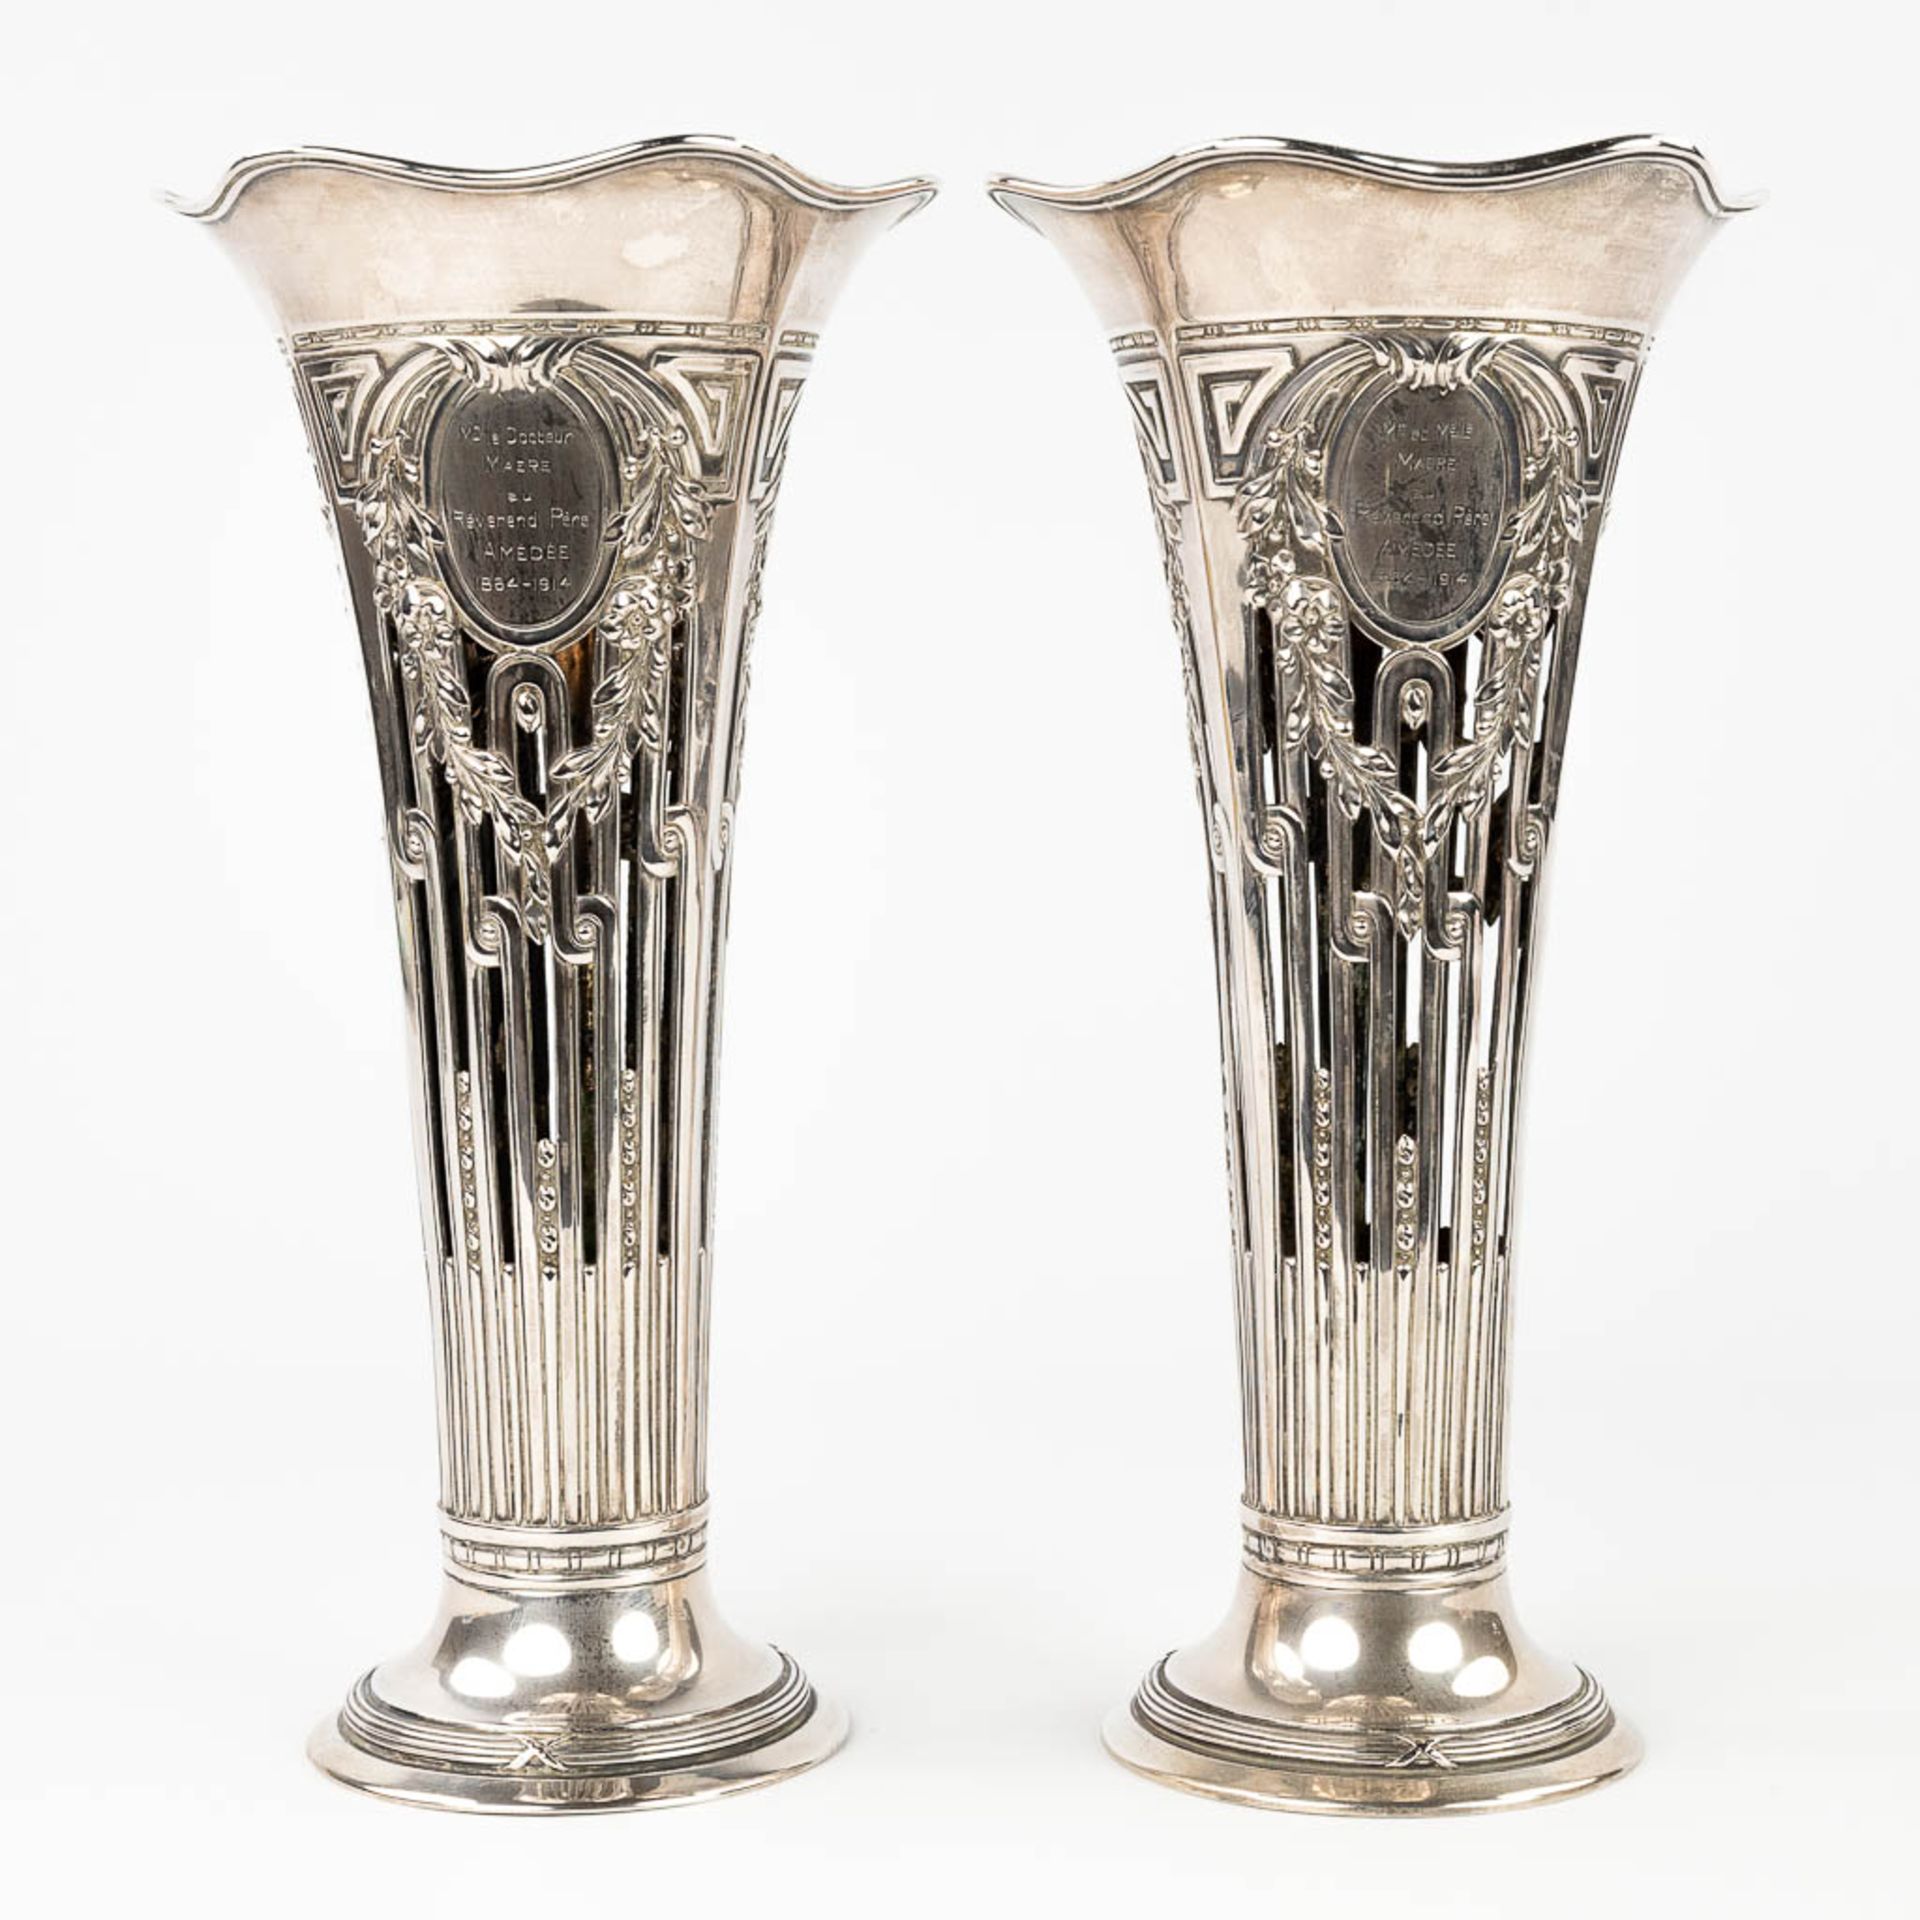 A pair of vases made of silver and marked 800. Made in Germany. 693g. 20th C. (H:31 x D:15,5 cm) - Image 3 of 14